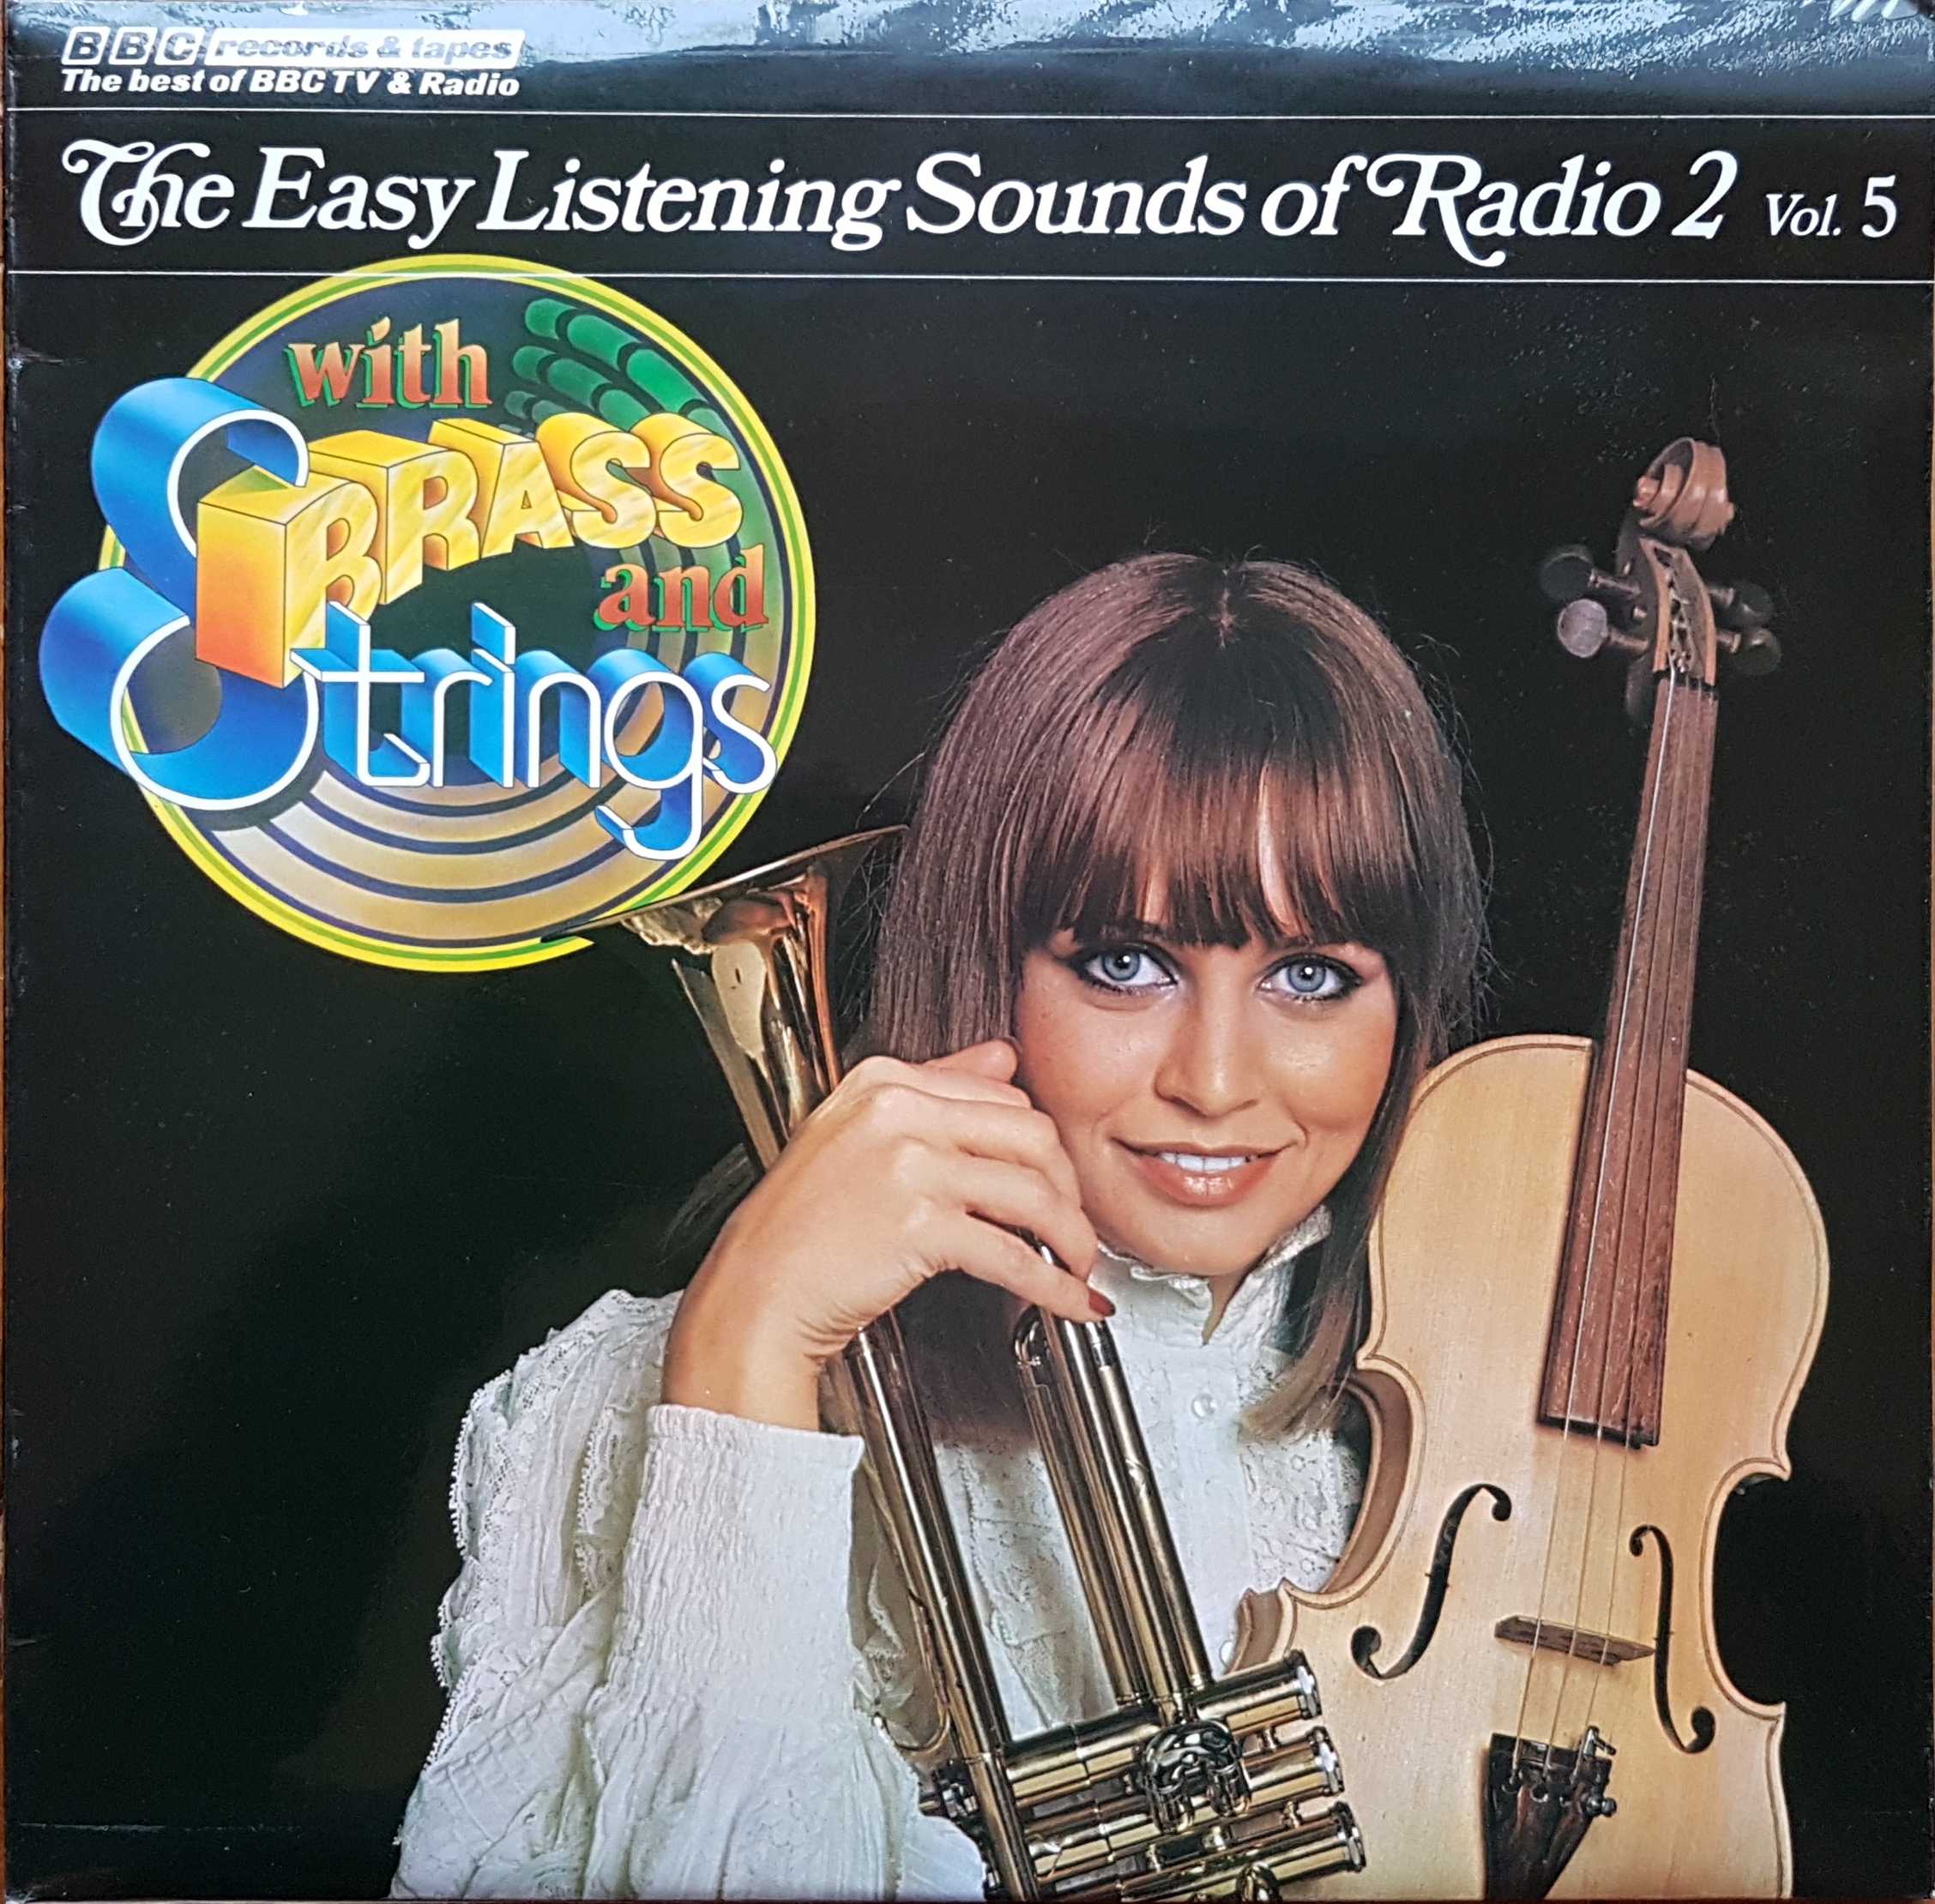 Picture of REC 266 Easy listening sounds of Radio 2 - Volume 5 by artist Various from the BBC albums - Records and Tapes library